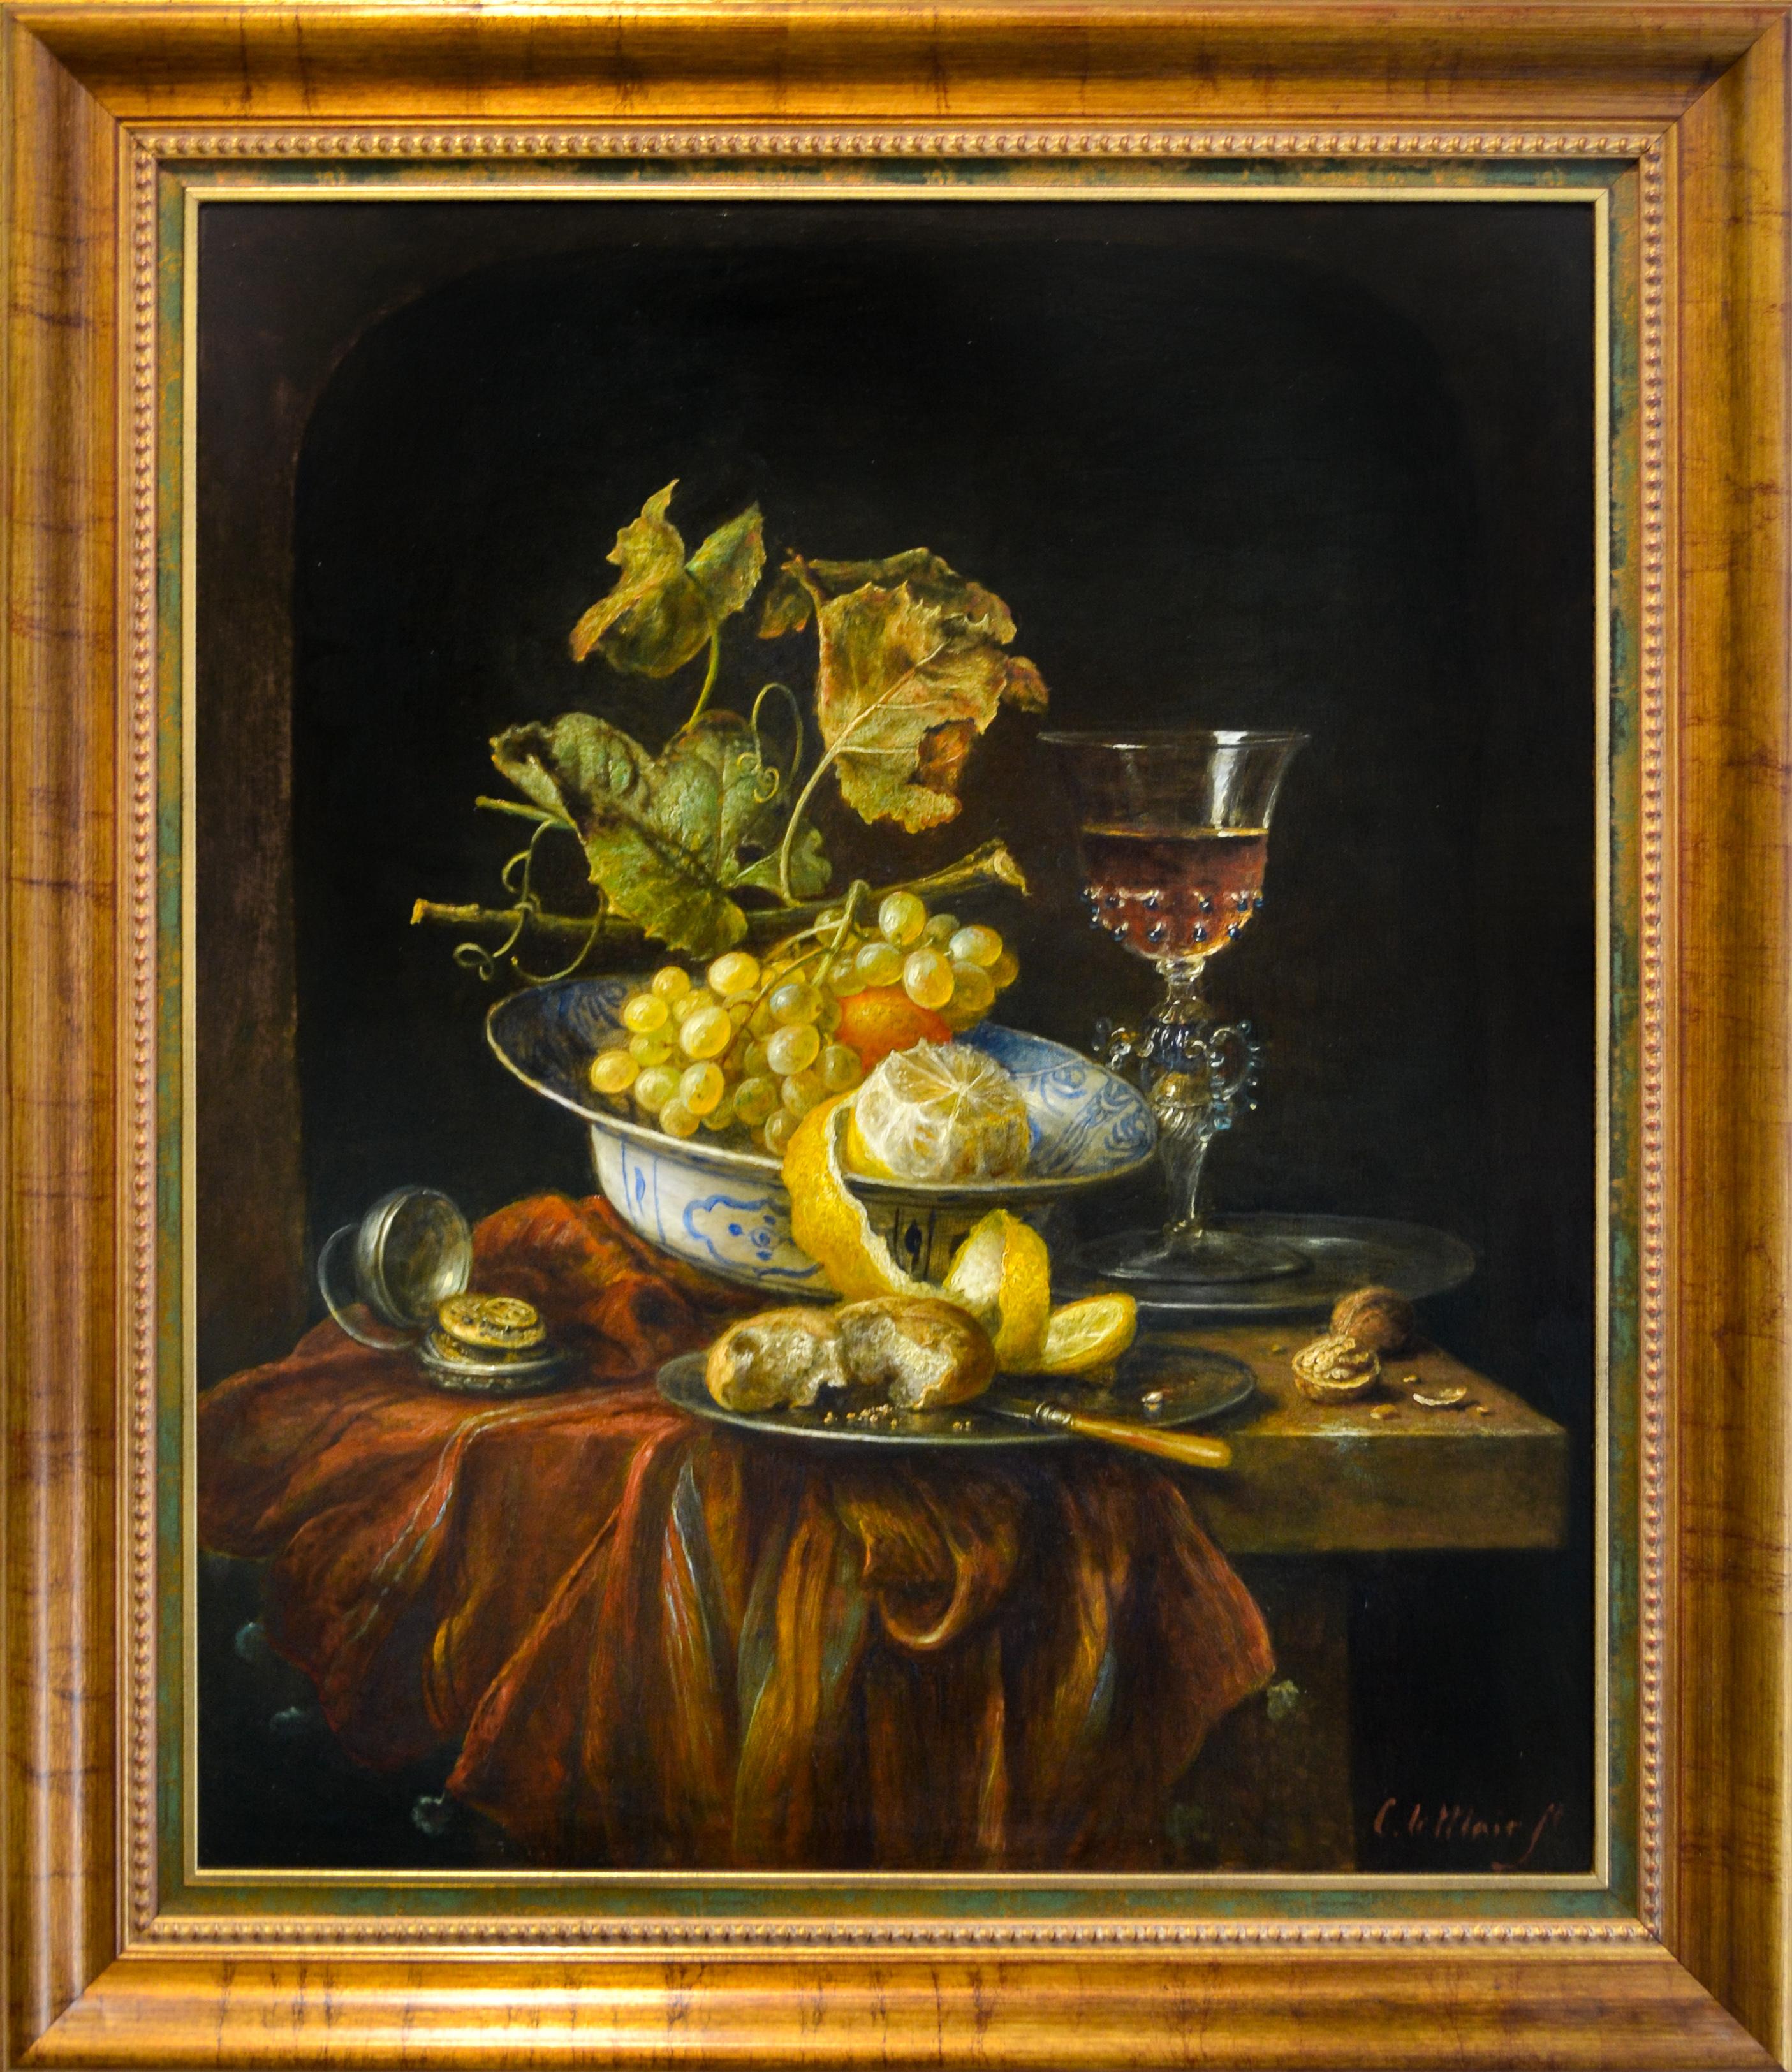 Venetian Glass with Lemon, Silver Beans, Delfts Blue Bowl and Pocket Watch - Painting by Cornelis Le Mair